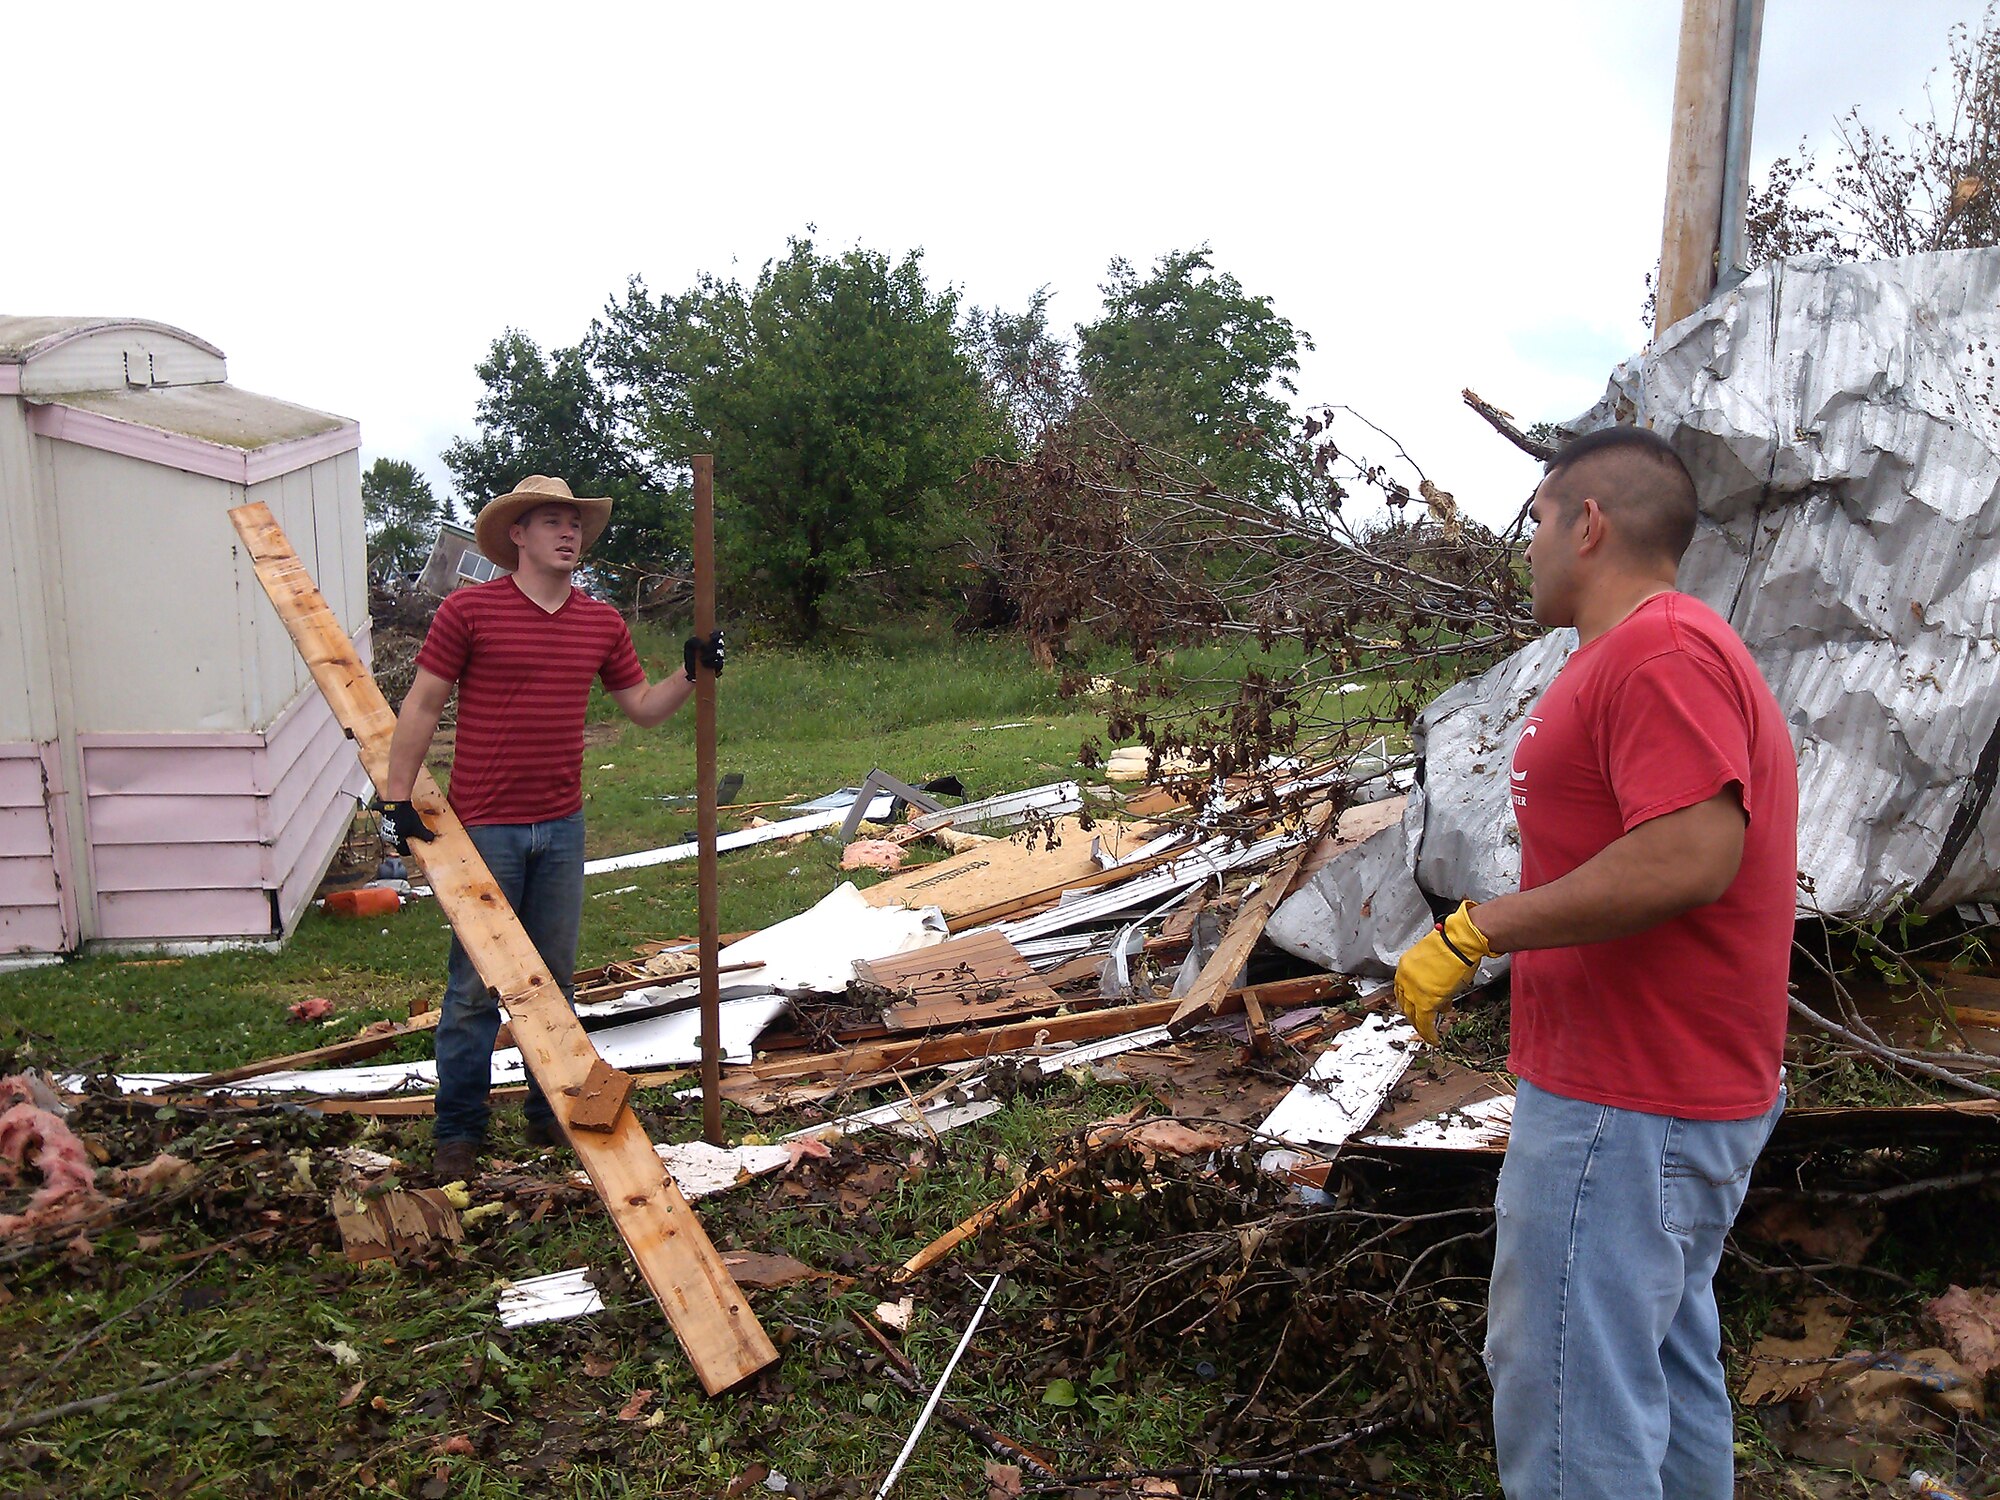 Senior Airman Charles Little, left, and Airman 1st Class Stephen Robles help remove debris June 22, 2014 in Wakefield, Nebraska. They volunteered to help with the cleanup of Wakefield following a tornado that struck the town June 16, 2014. Little and Robles are contracting specialists from the 55th Contracting Squadron. (Courtesy photo)